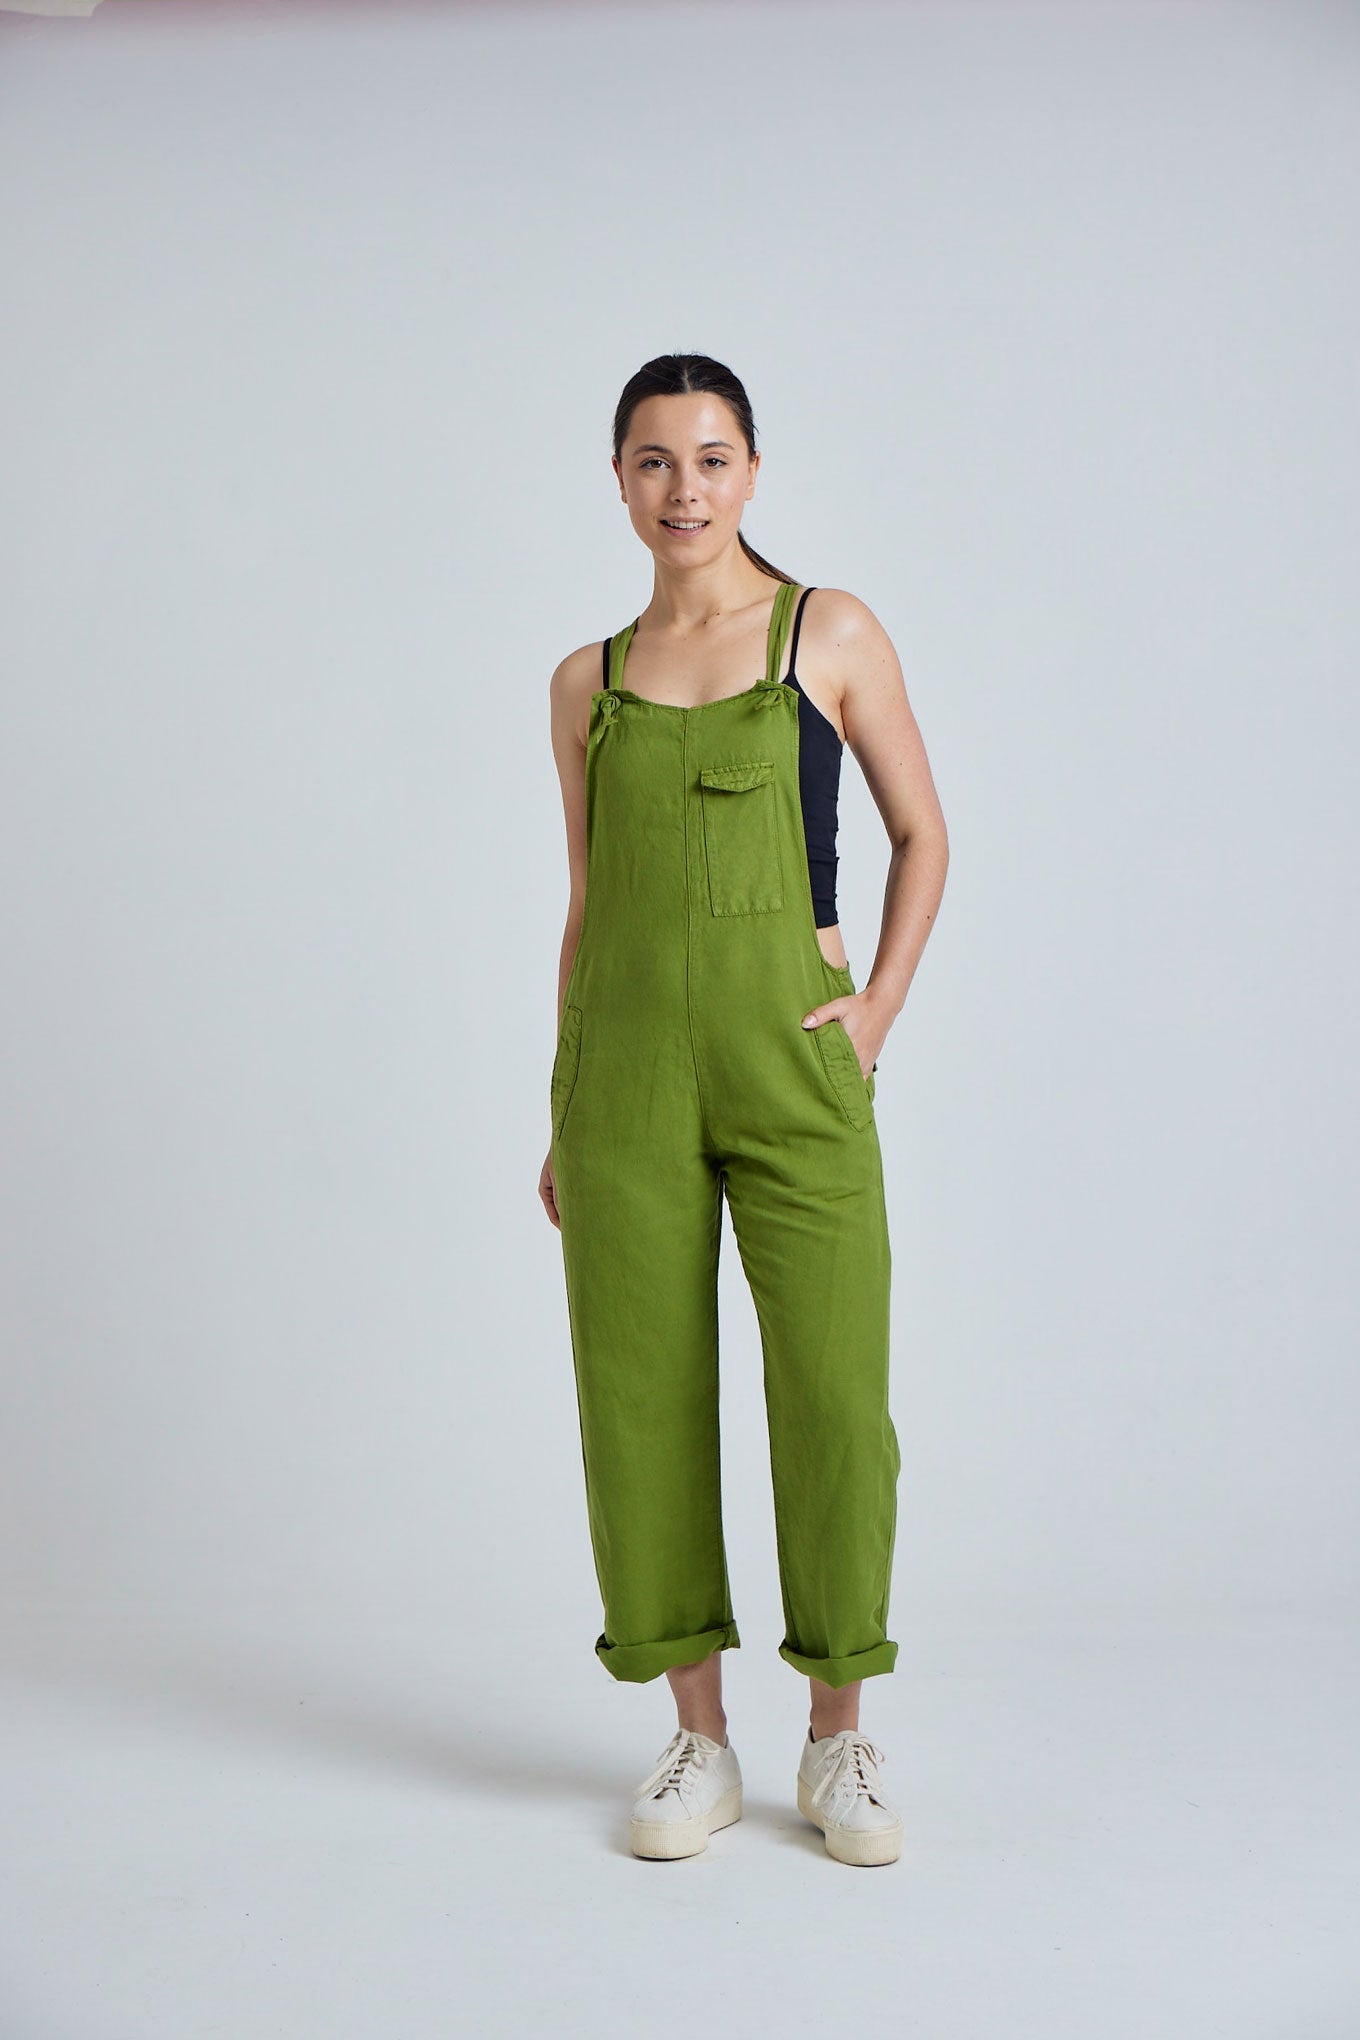 MARY-LOU Green - GOTS Organic Cotton Dungaress by Flax & Loom, SIZE 3 / UK 12 / EUR 40